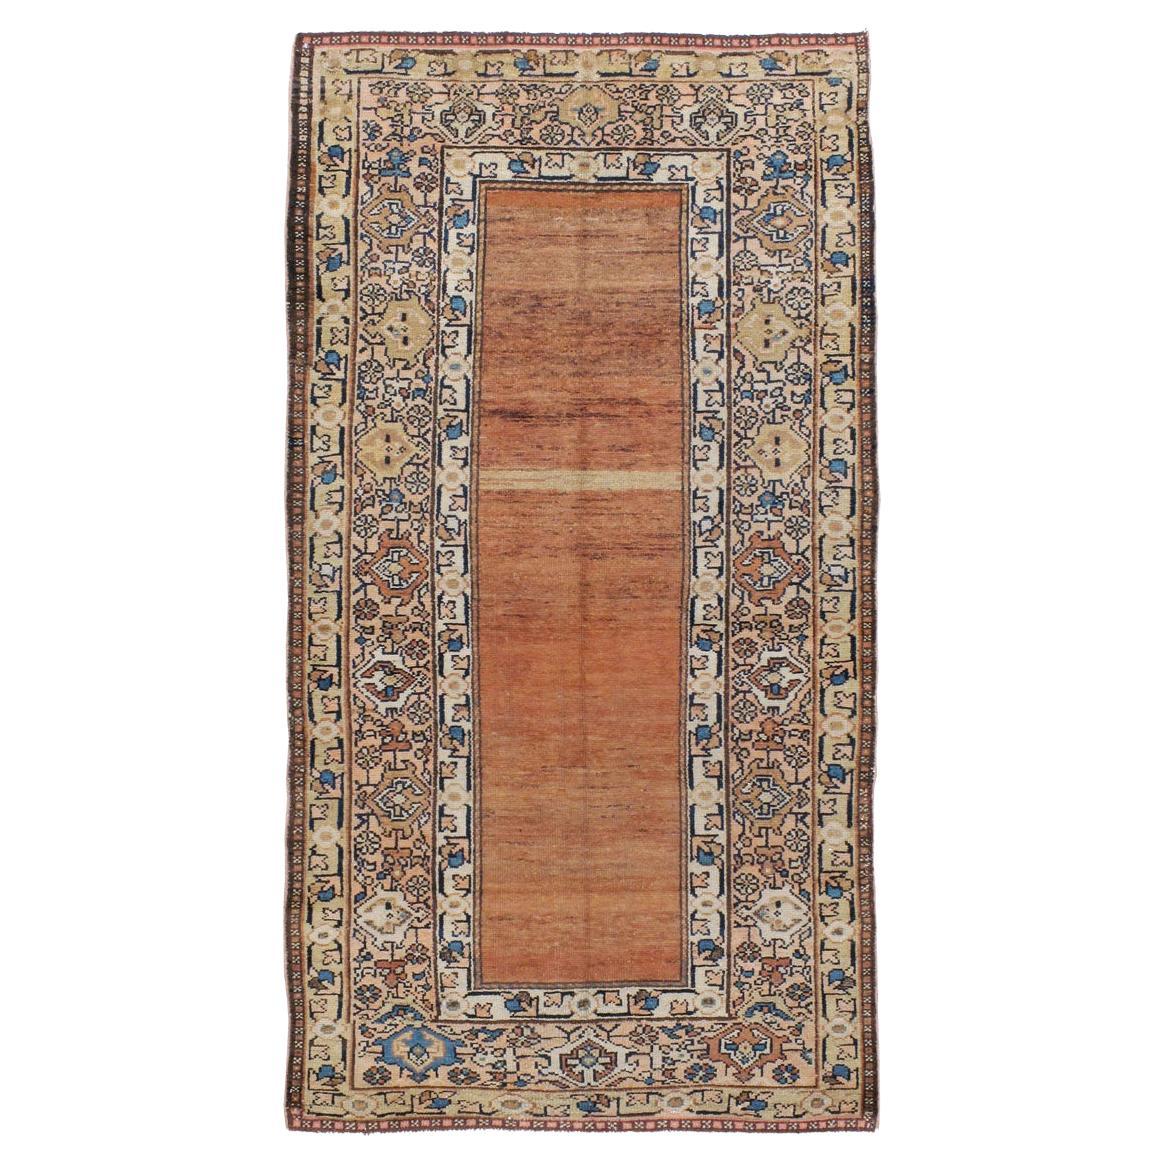 Rustic Antique Persian Malayer Small Accent Rug